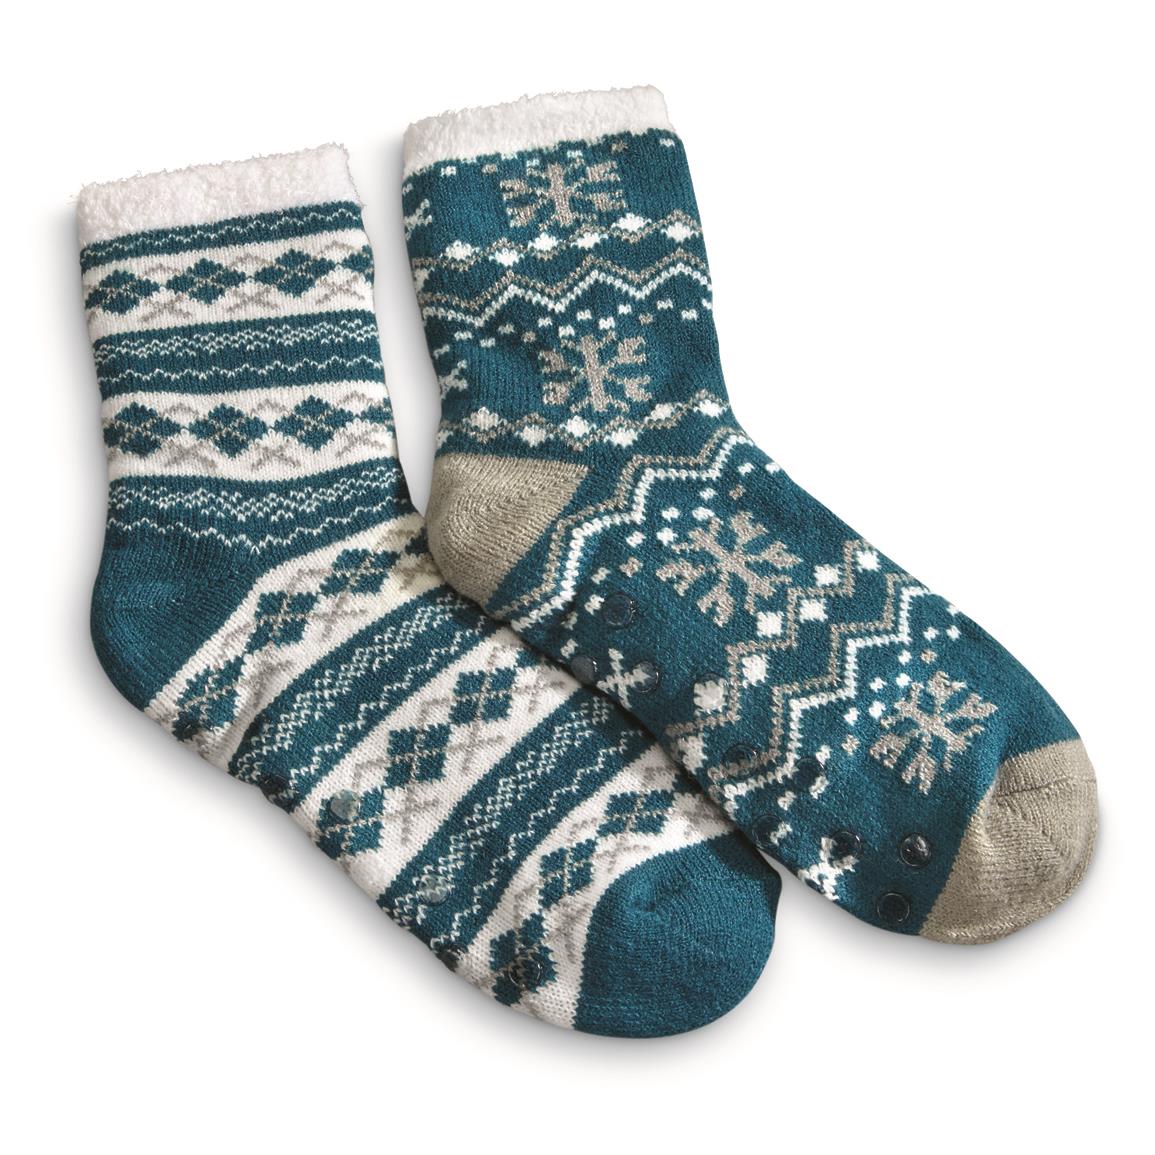 Guide Gear Women's Double-layer Gripper Socks, 2 Pairs, Teal